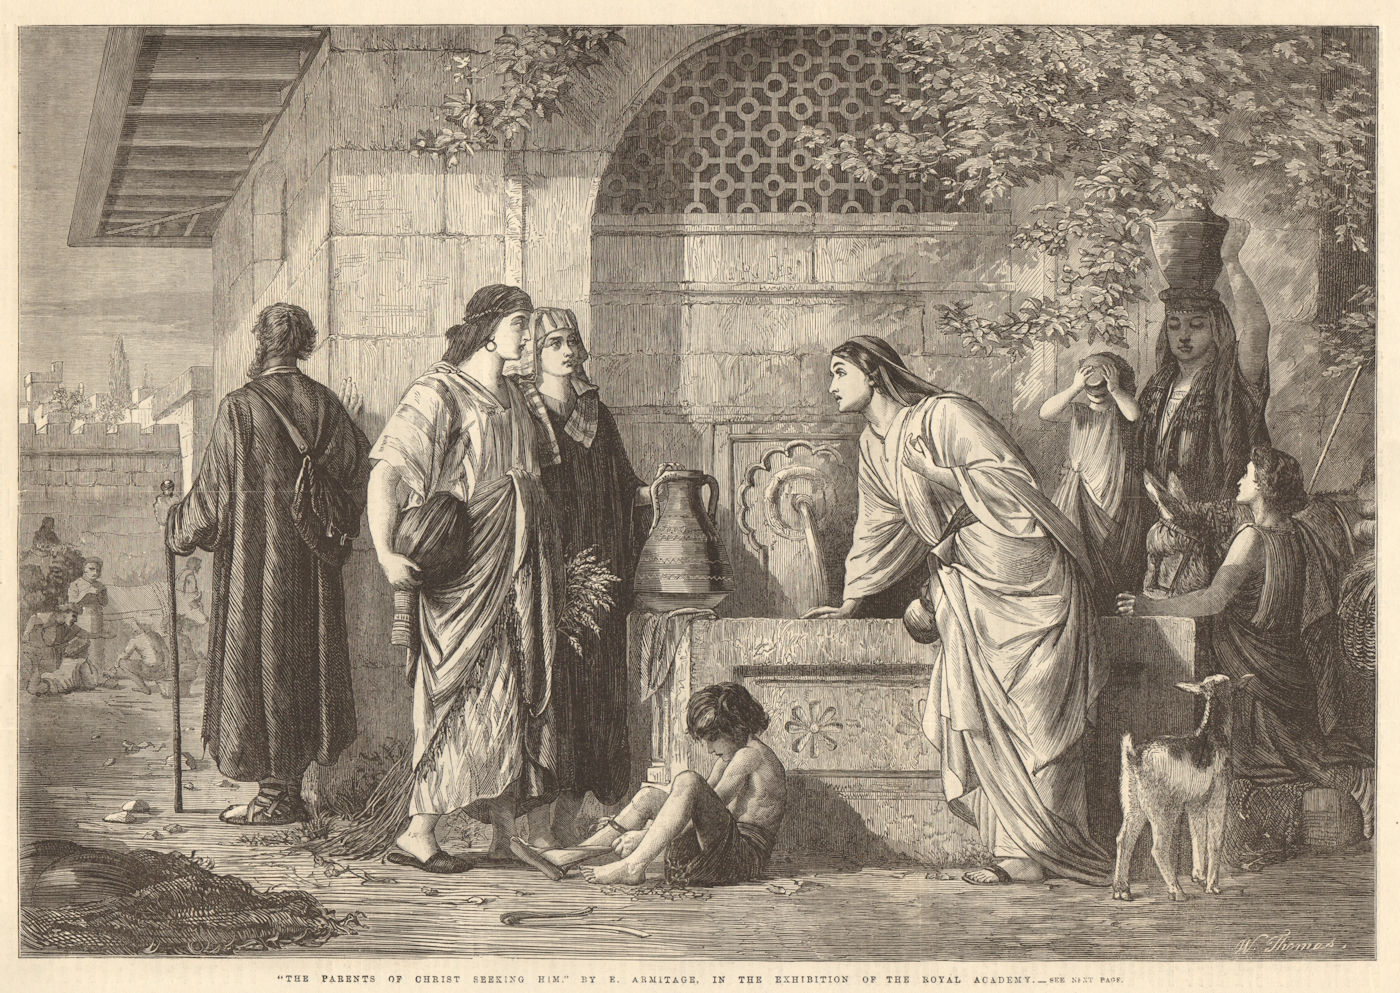 "The parents of Christ seeking him", by E. Armitage. Family. Bible 1866 print